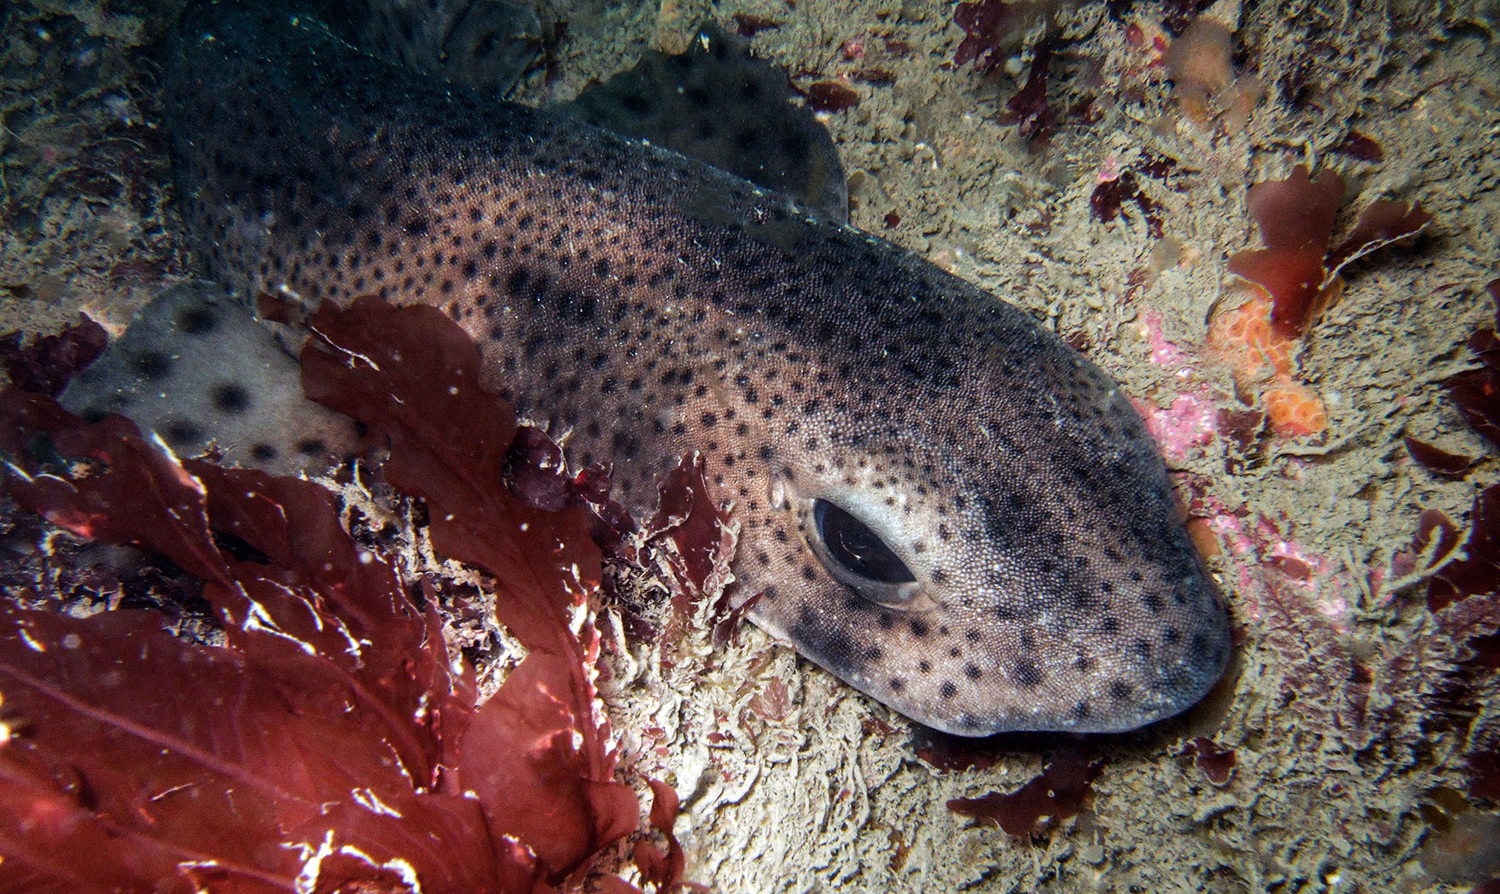 A dogfish, also called the small-spotted catshark, lies in a gully in Pembrokeshire and is a common sighting on UK dives